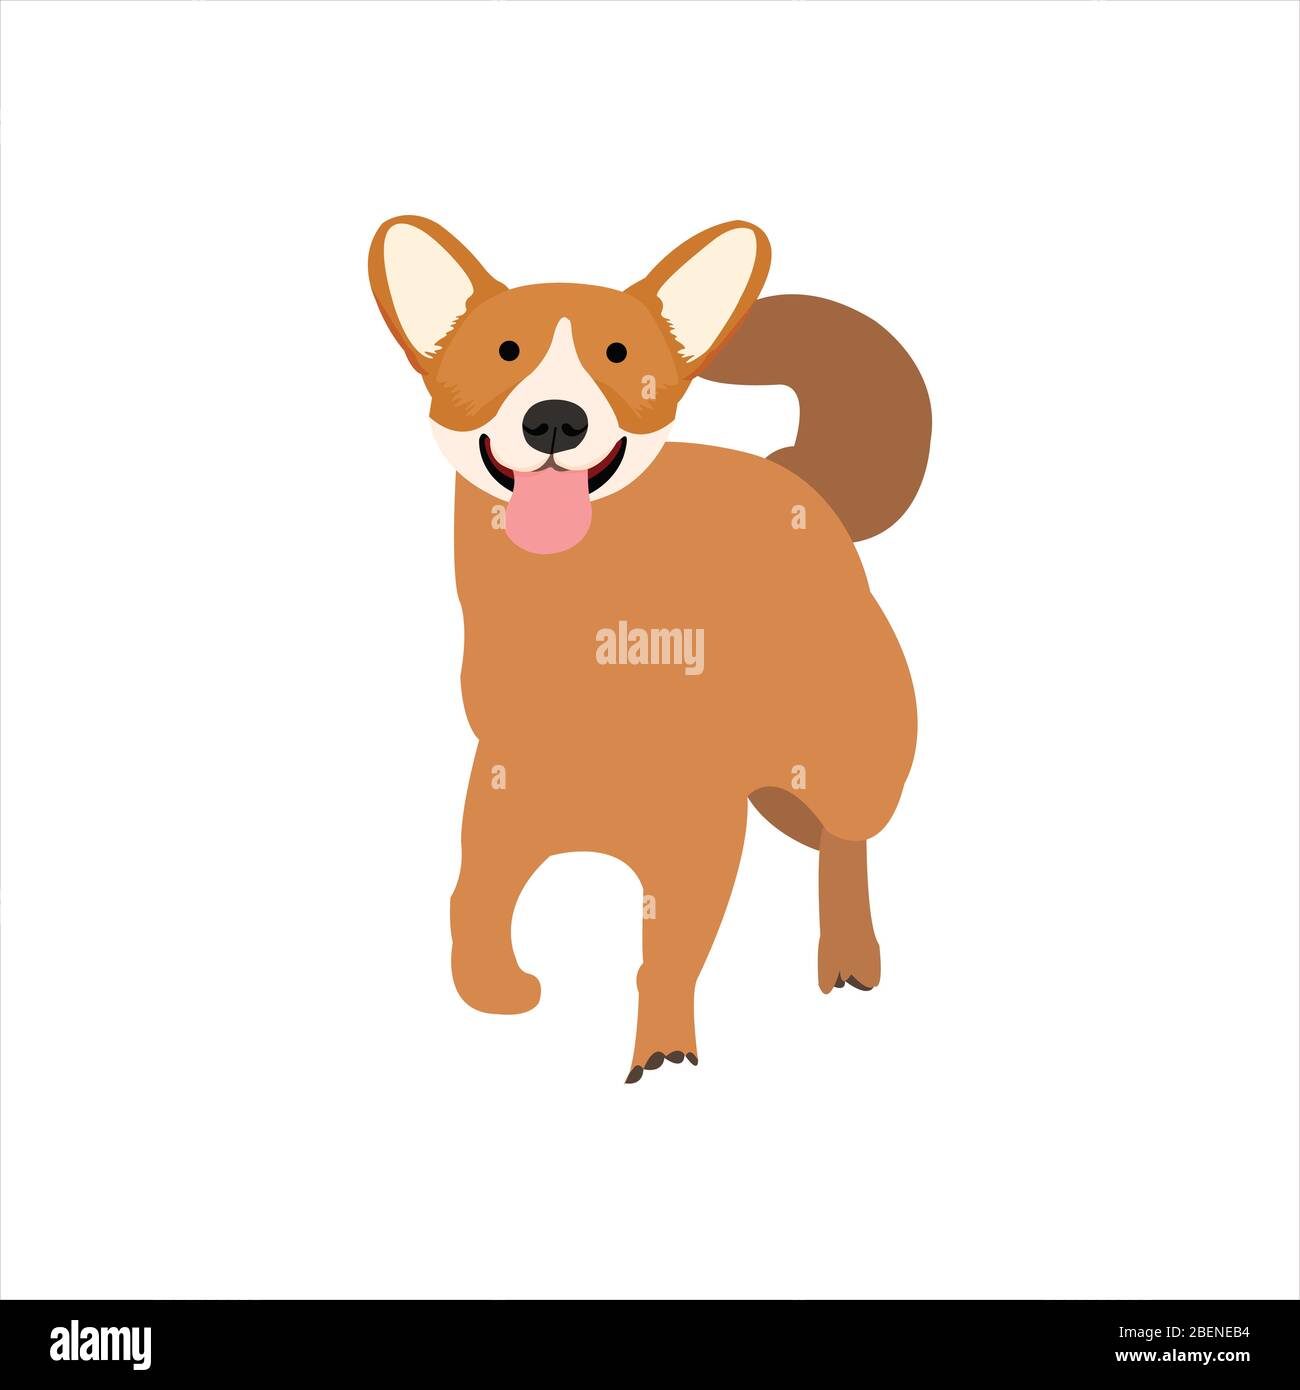 Funny dog clip art illustration with cartoon style Stock Vector